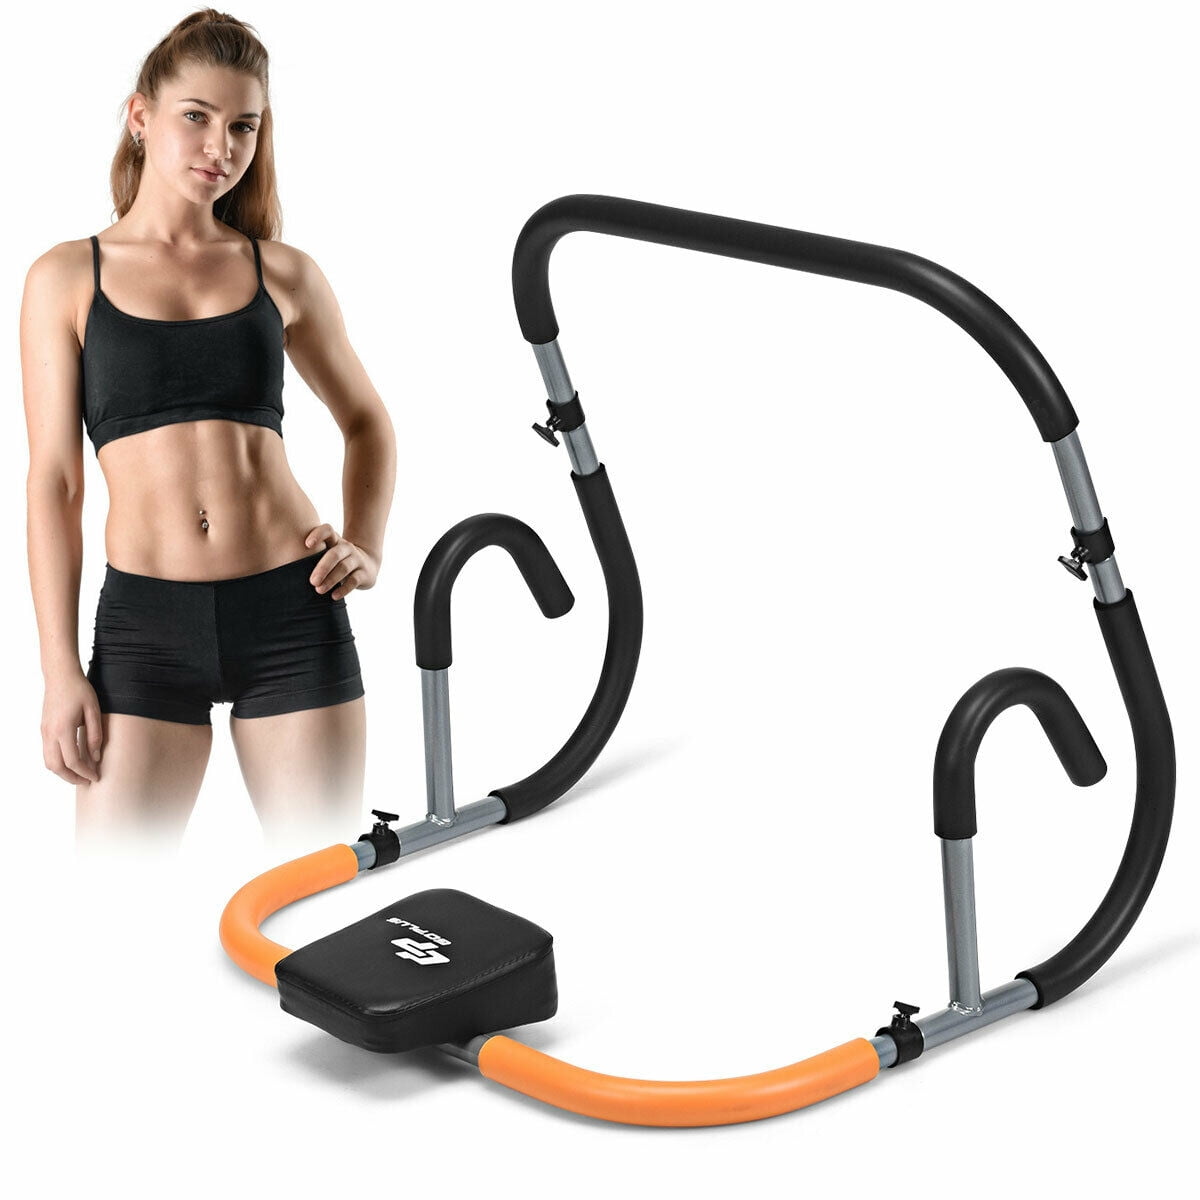 Abdominal Trainer AB Machine Exercise Crunch Roller Exerciser Home Workout Gym